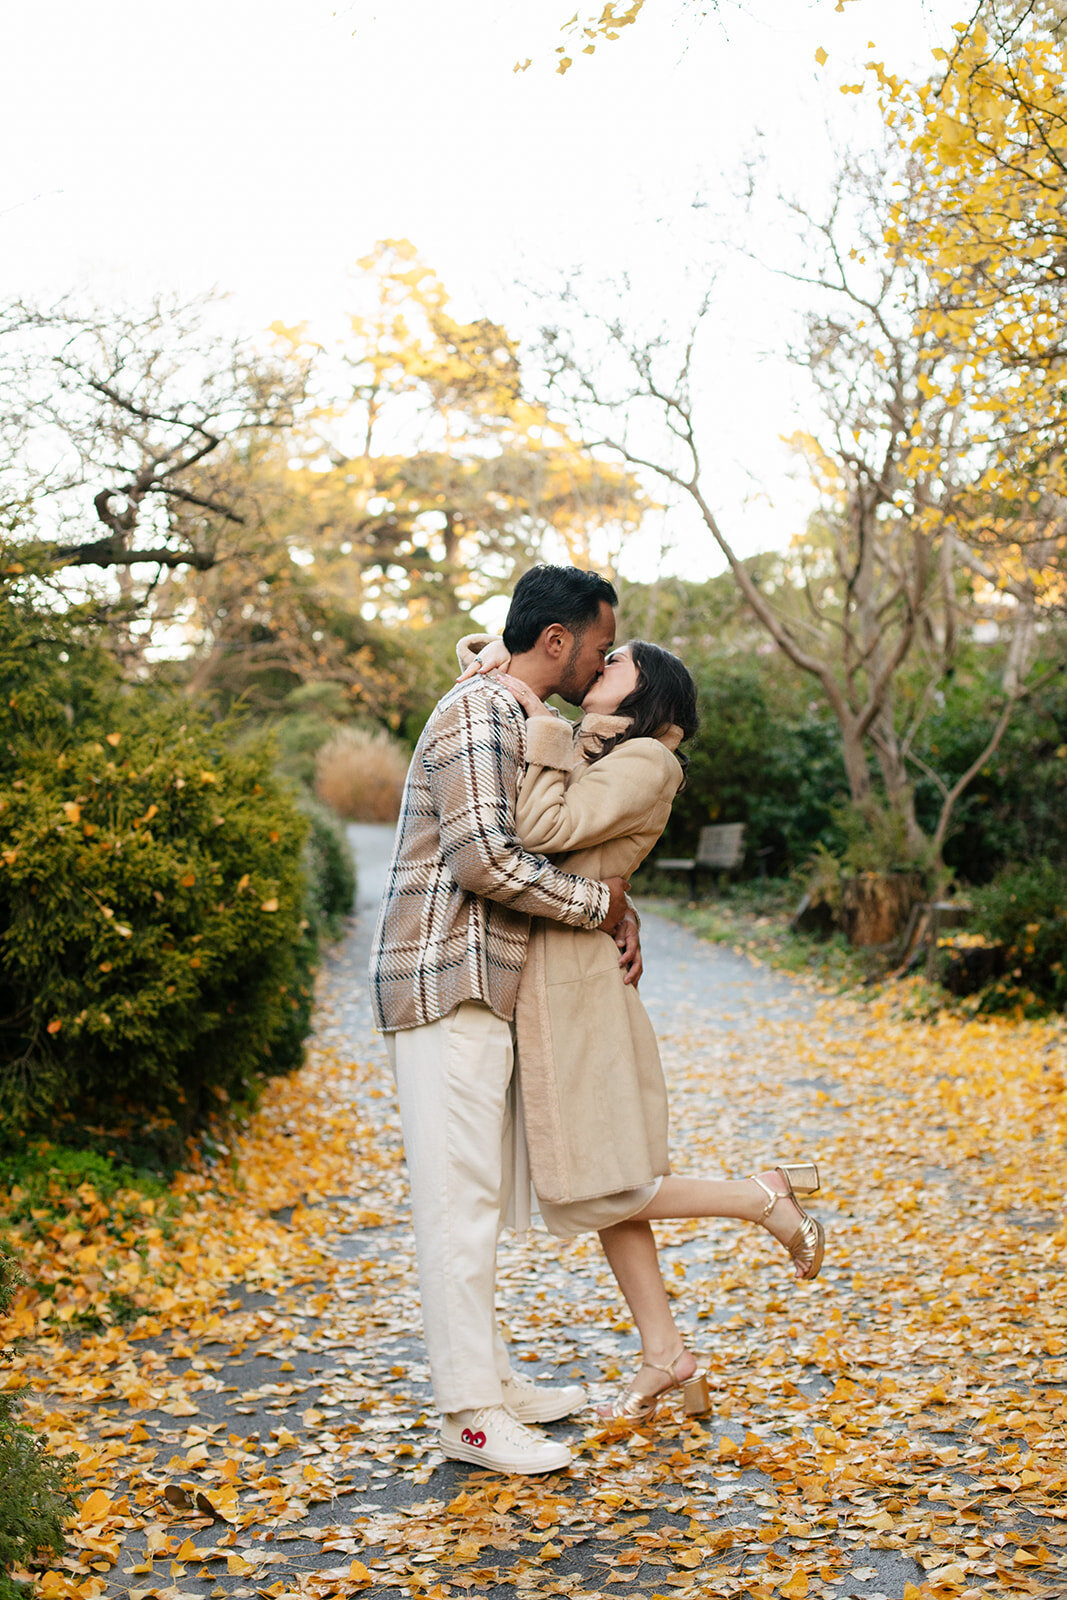 Lily_Roel_Engagement-5234